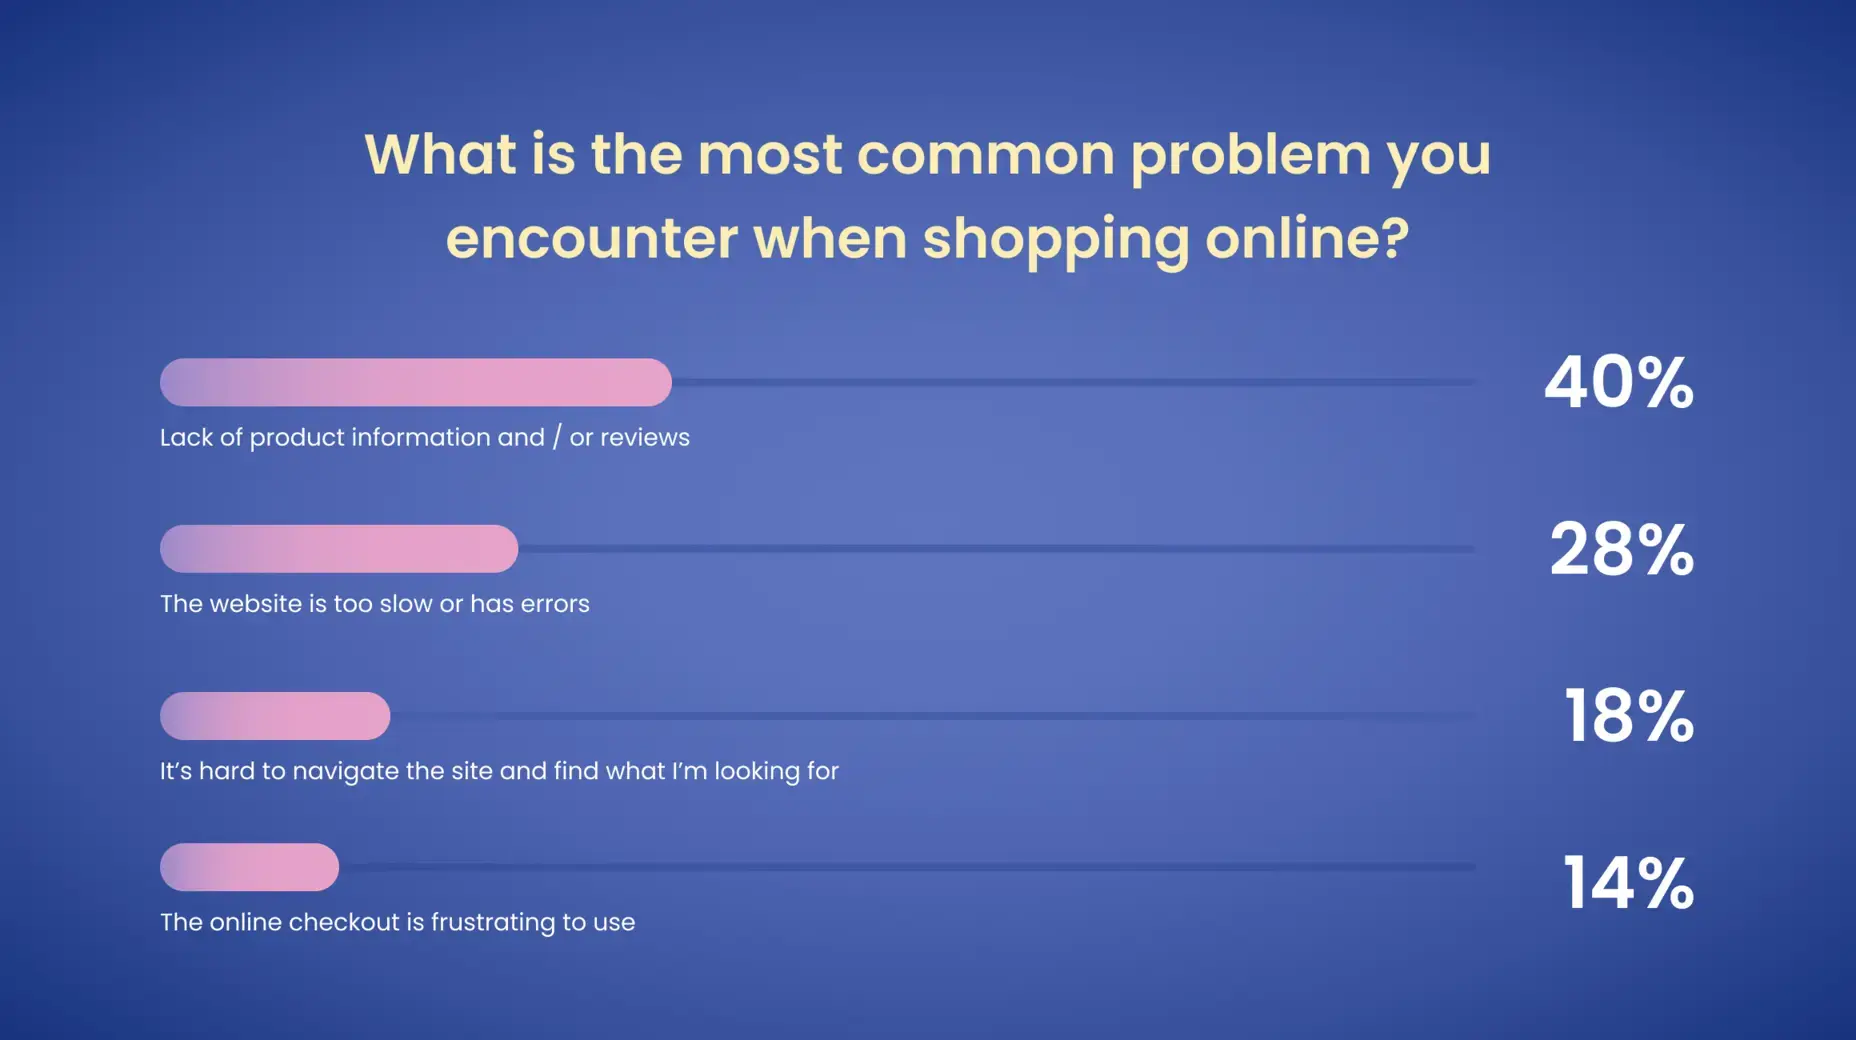 What is the most common problem you encounter when shopping online